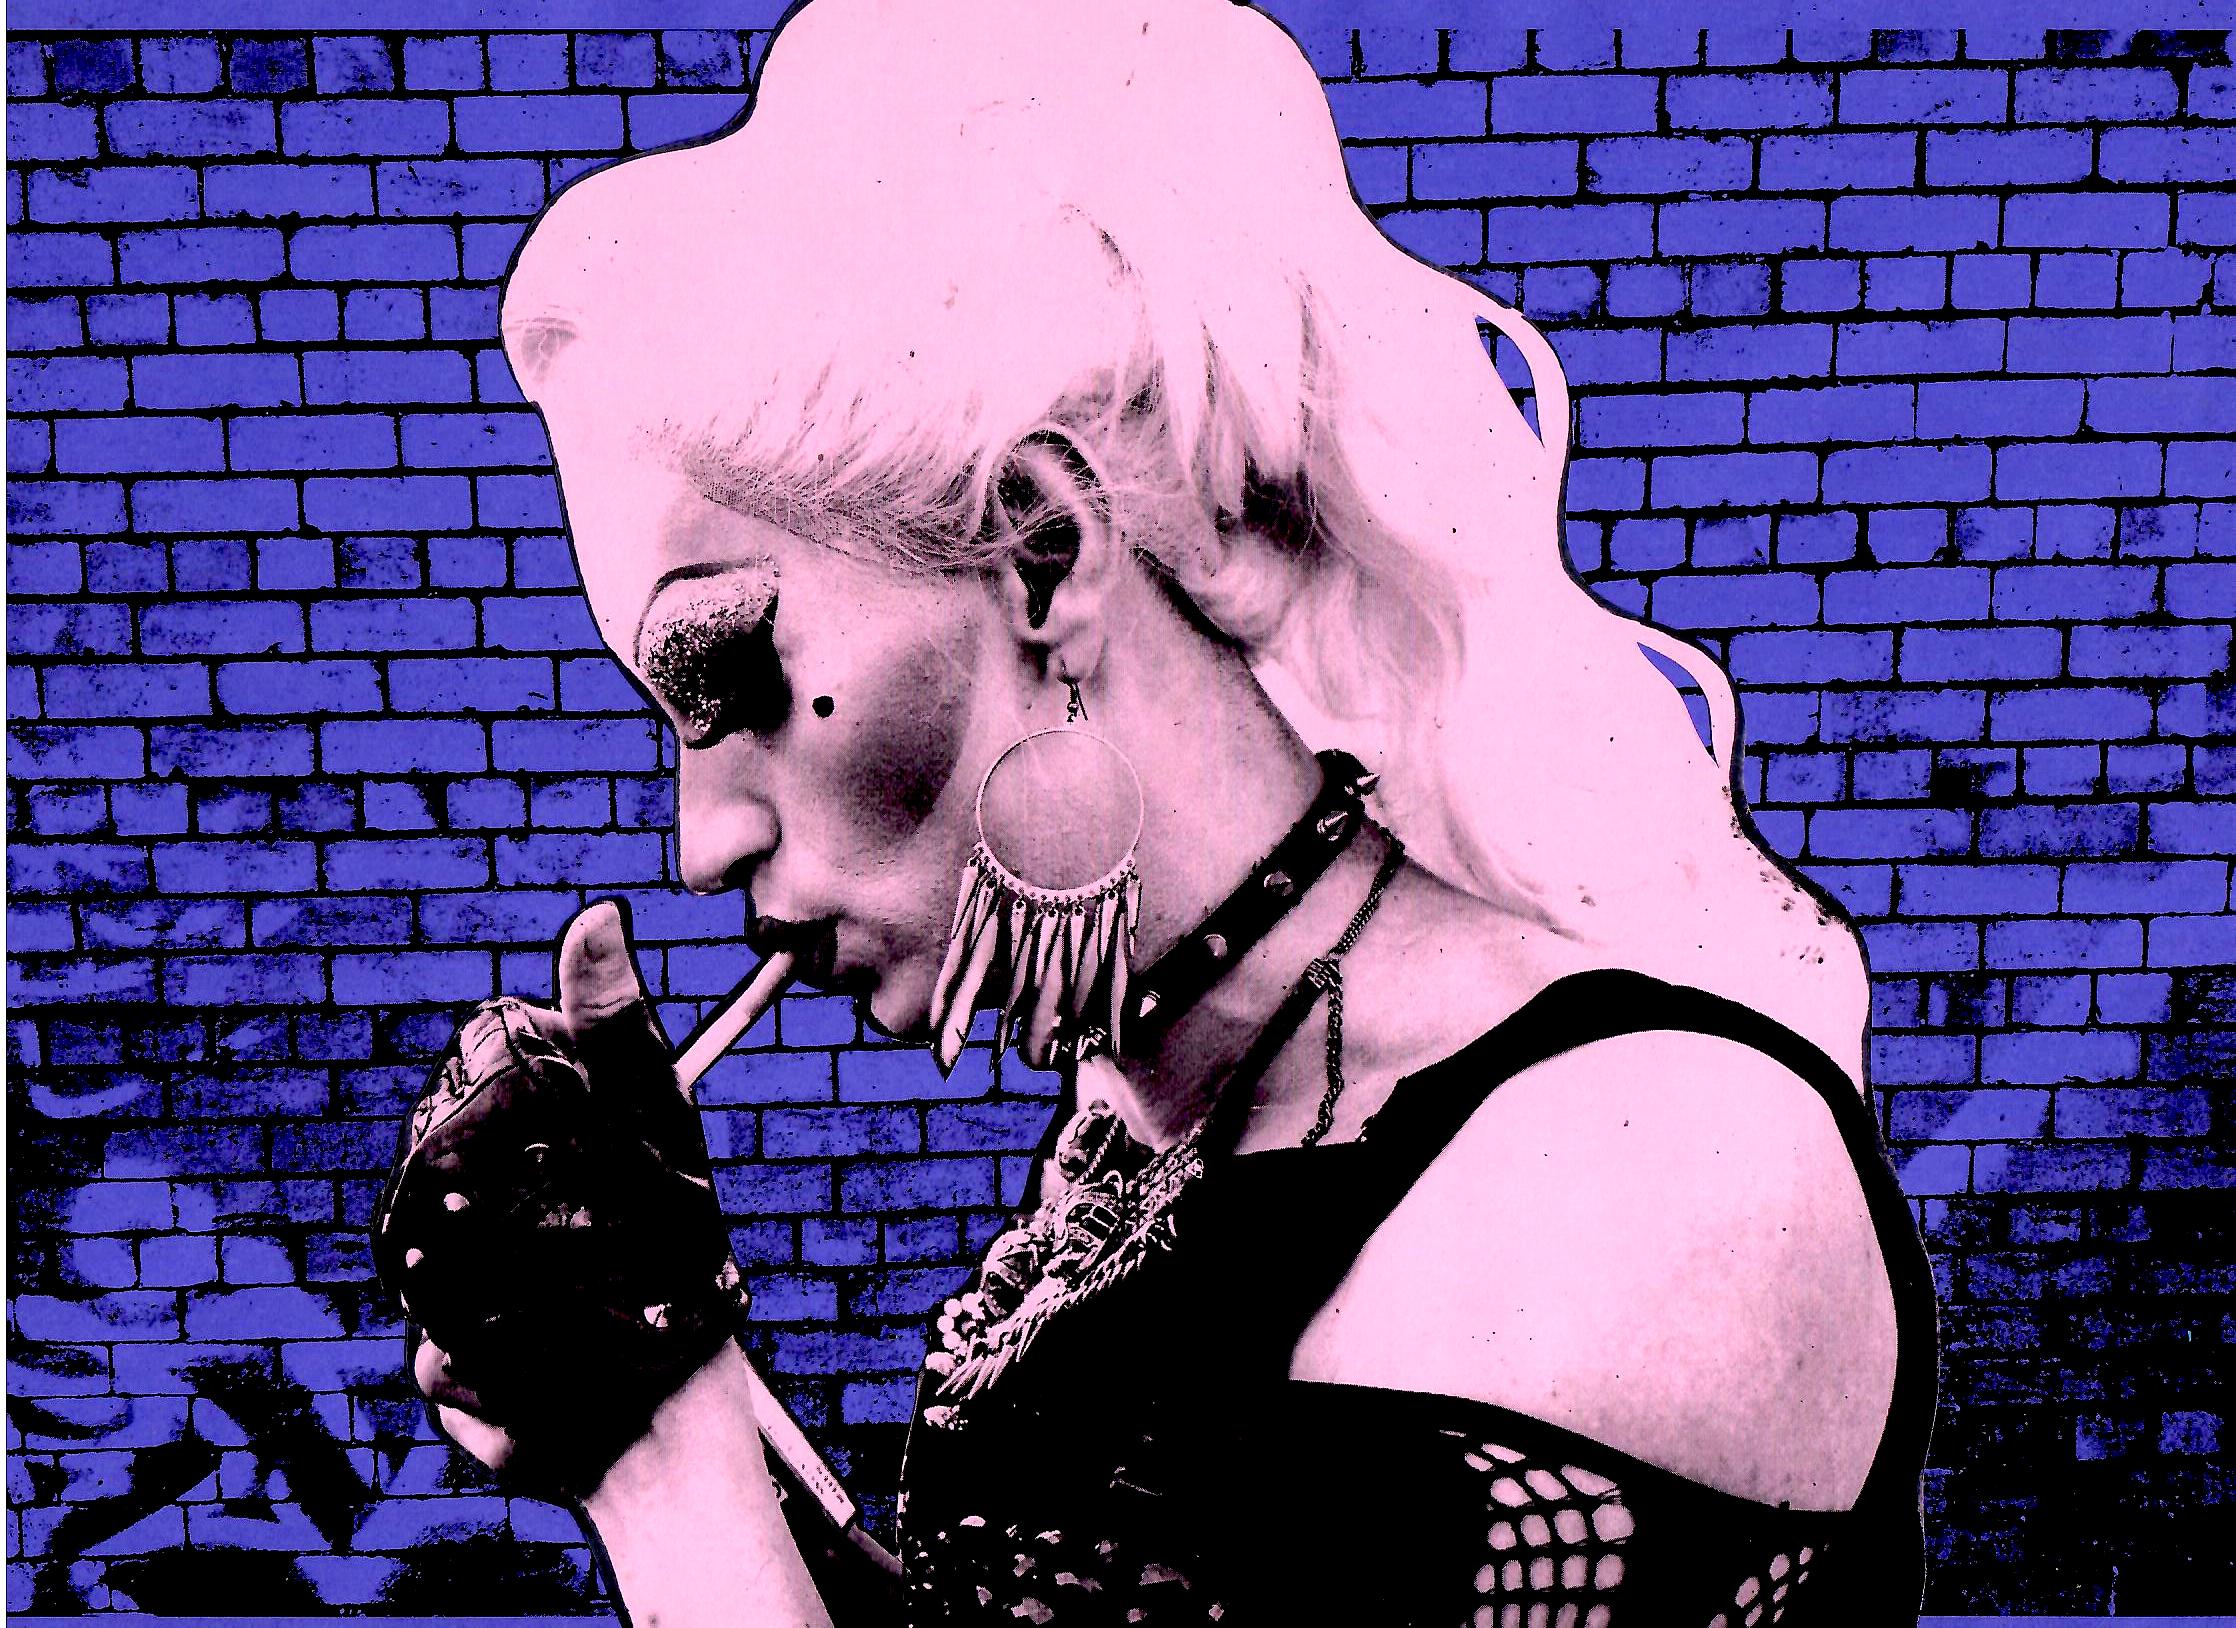 lady smoking a cigarette filtered in pink against a blue brick wall